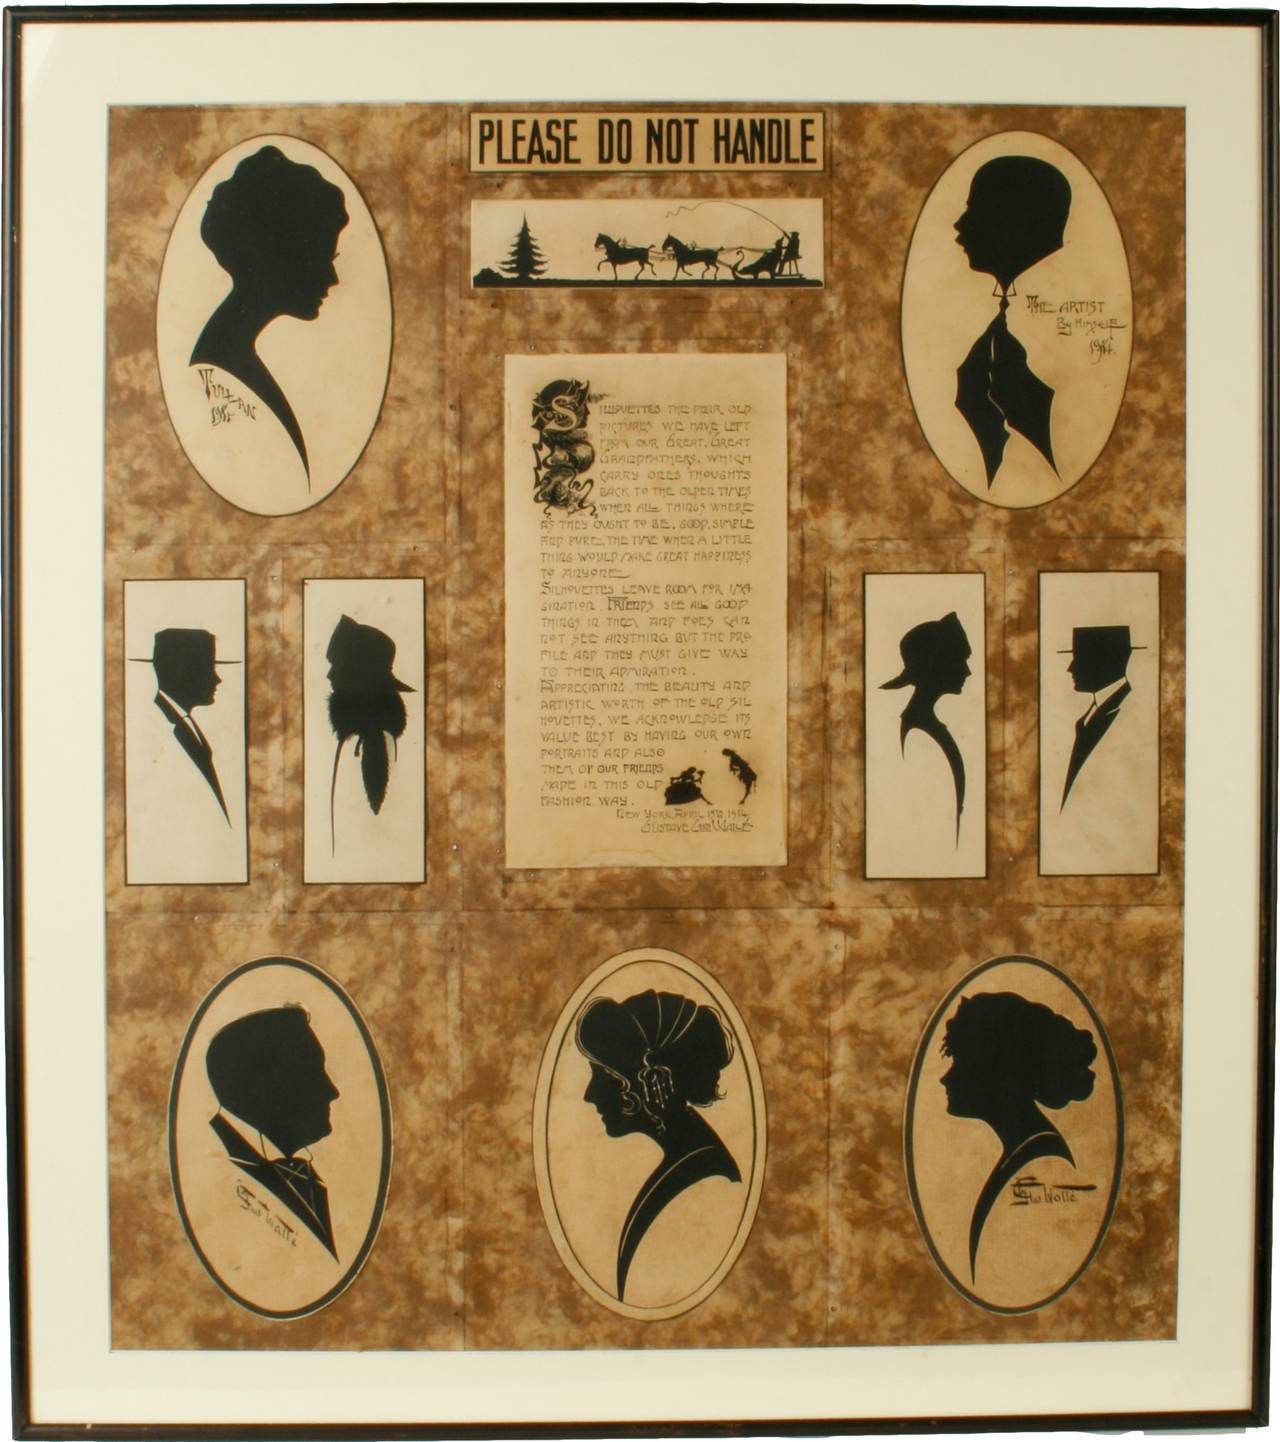 American Three Hand-Cut Promotional Posters by Silhouette Artist G. C. Walle, circa 1913